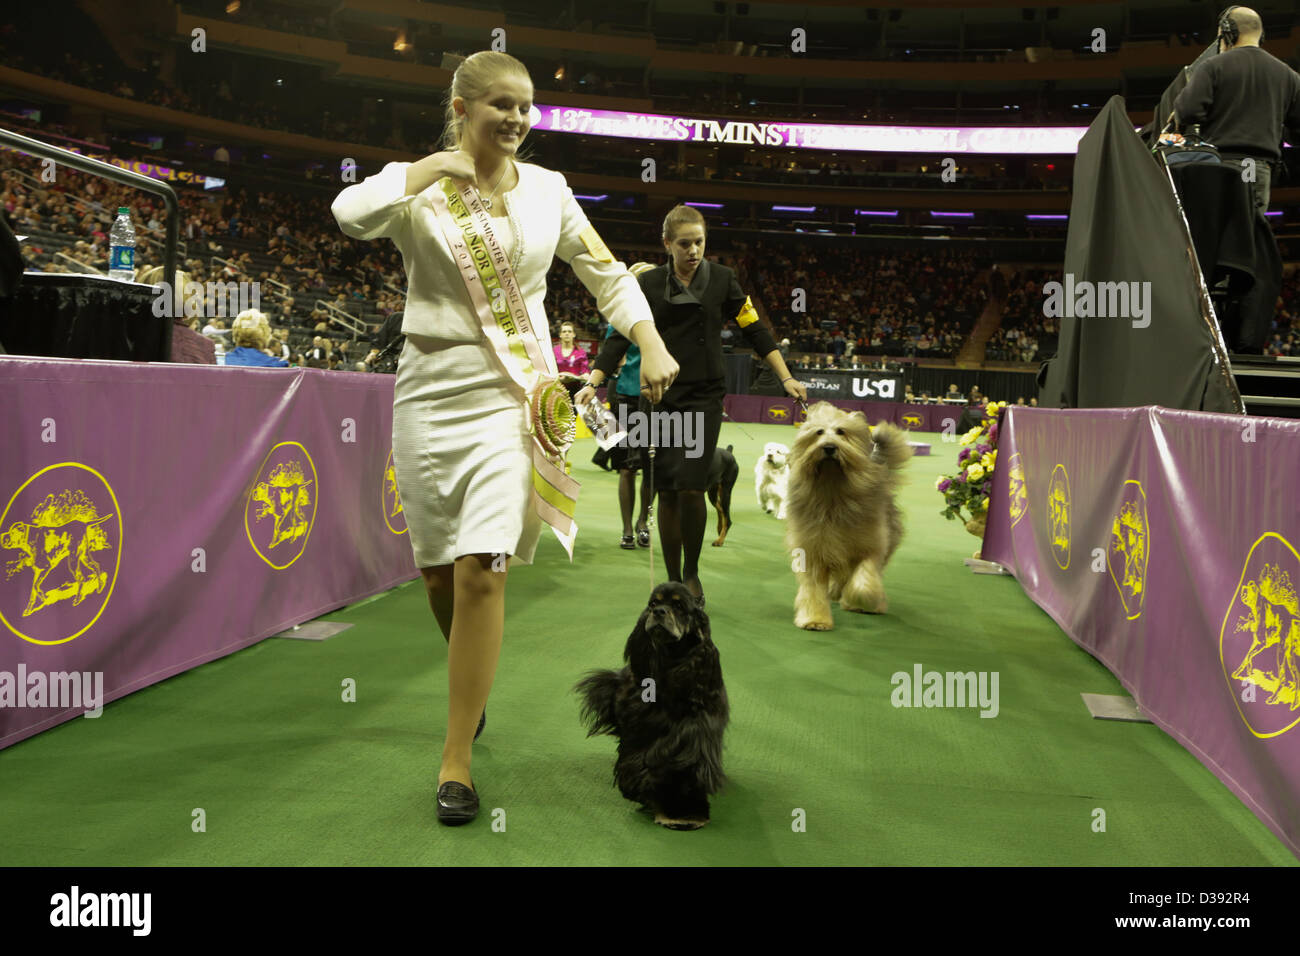 New York City, US, 12 February 2013. Savanah Livingston leaves the ring after winning the Junior Handler award with her American cocker spaniel at the 137th annual Westminster Kennel Club Dog Show. Stock Photo